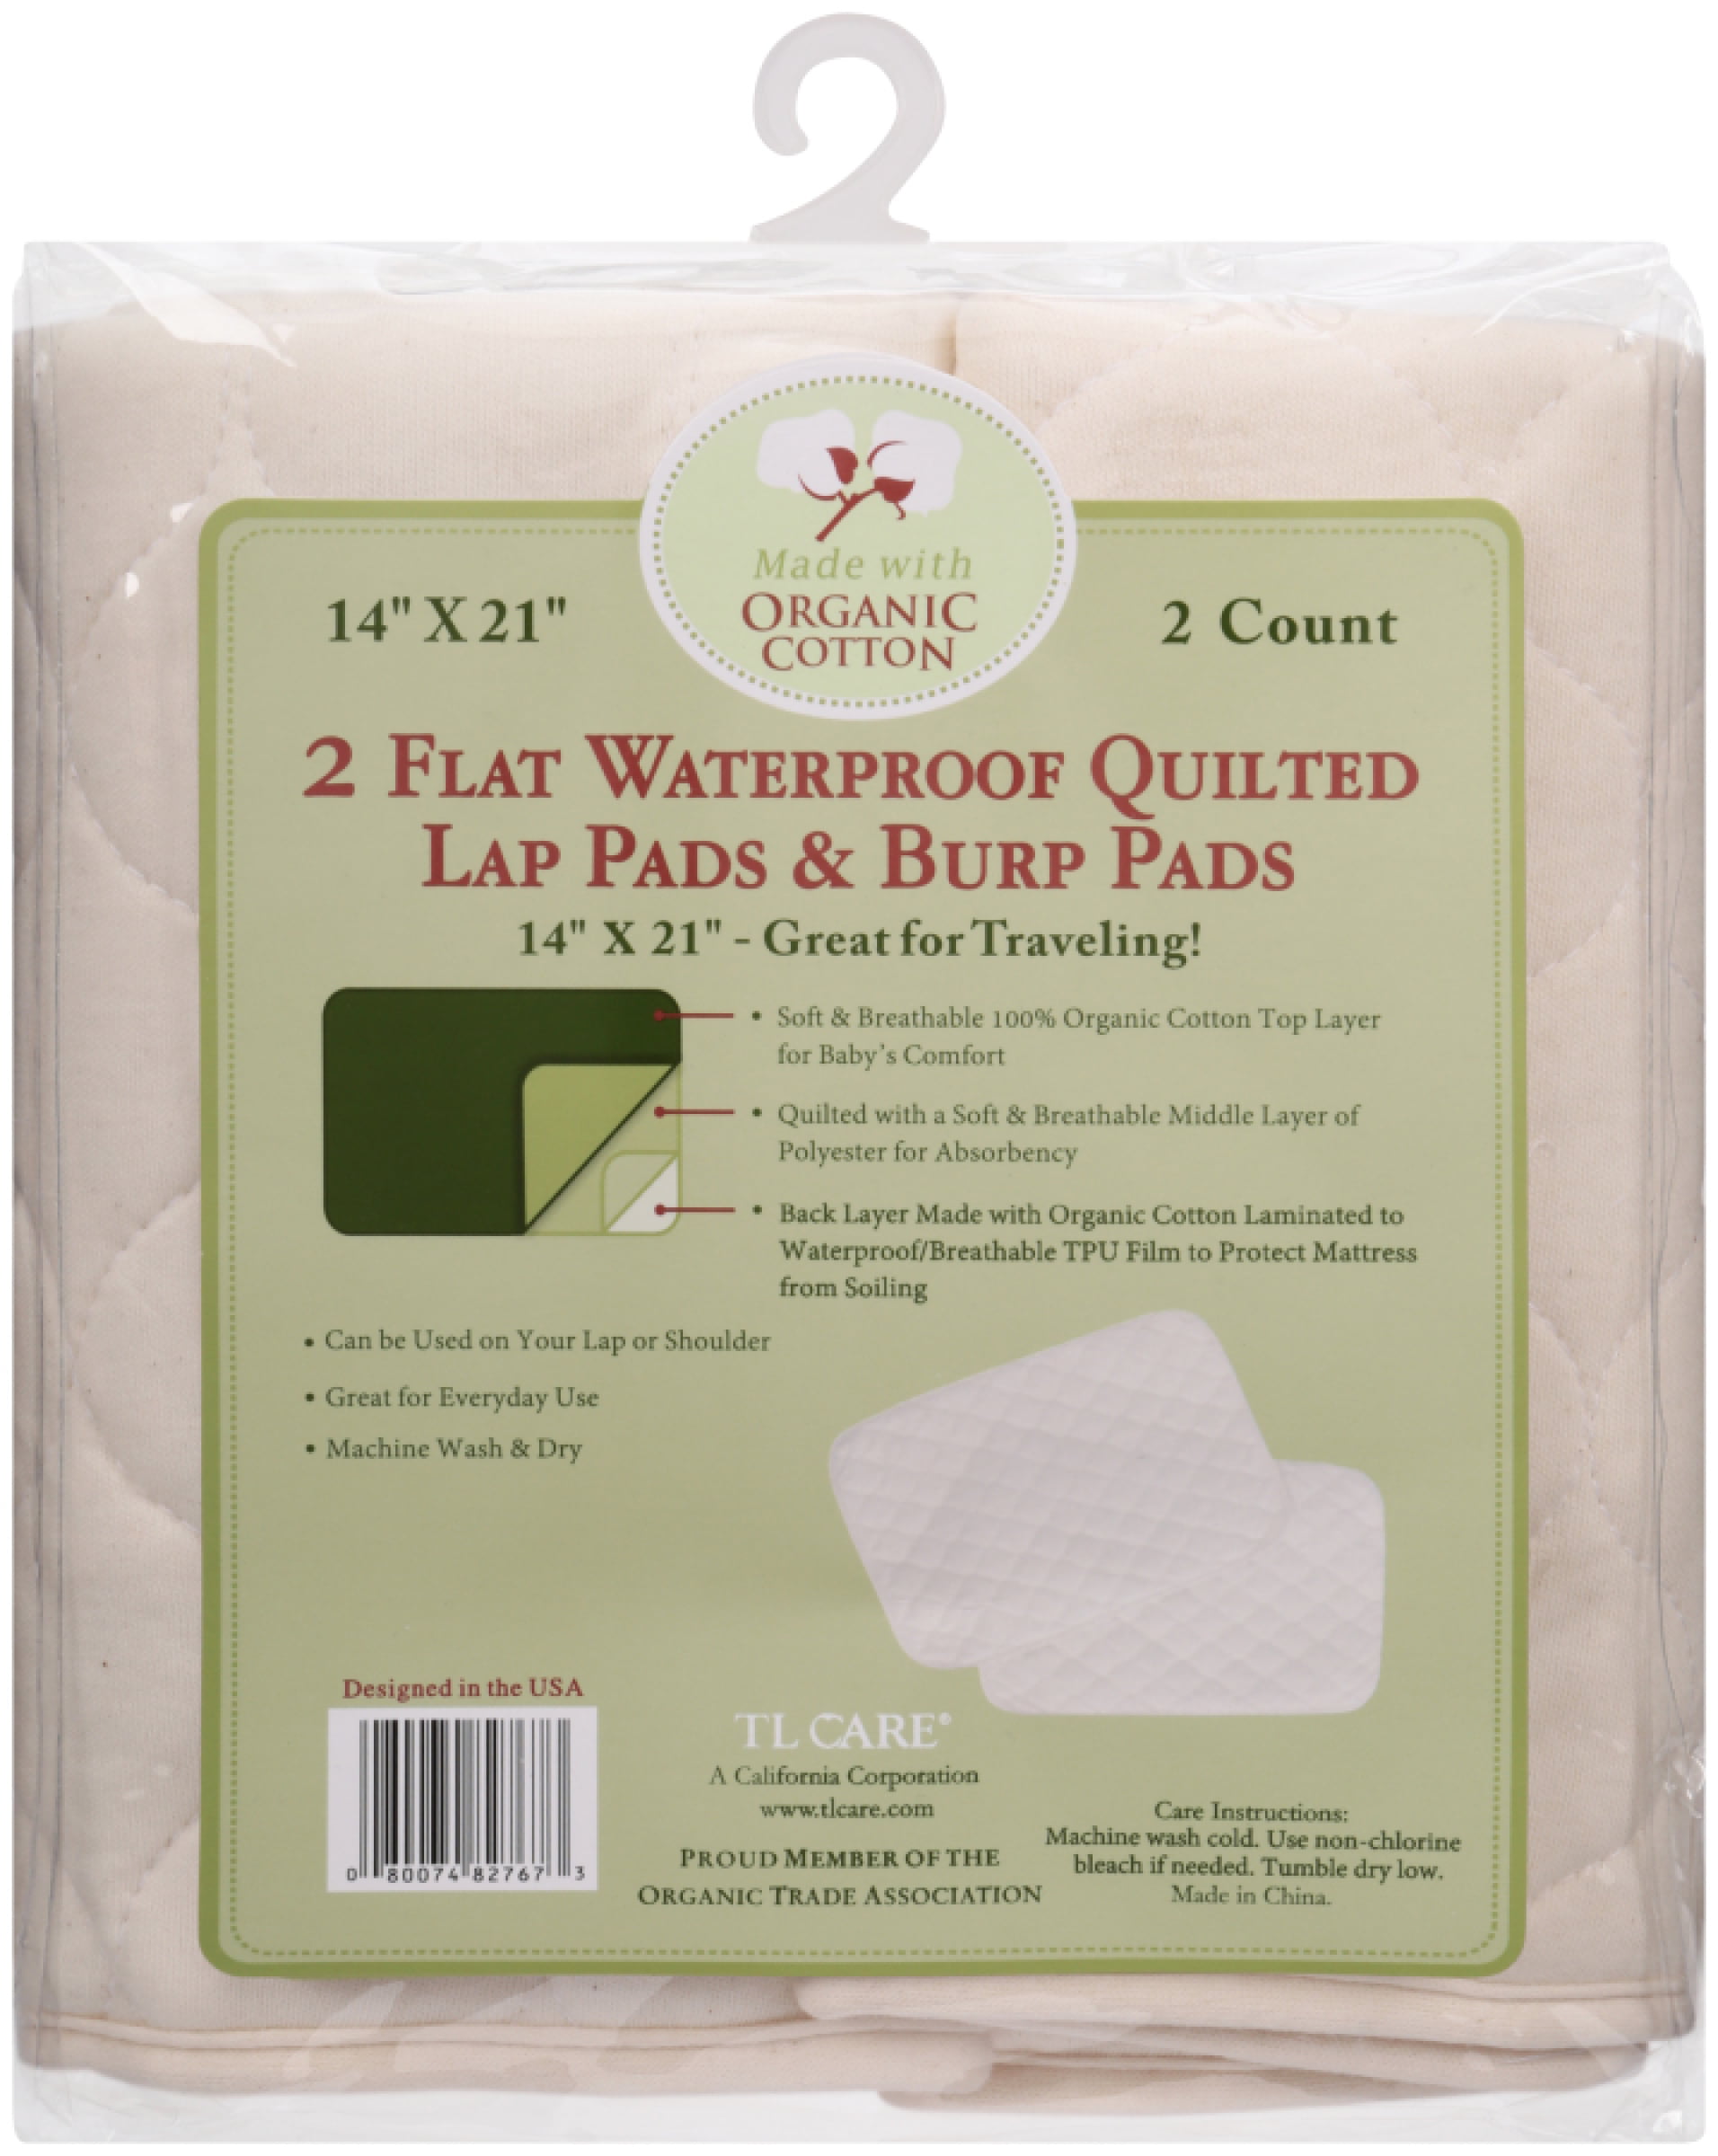 American baby company organic waterproof quilted multi use pad cover Natural Color Vinyl Free American Baby Company Waterproof Quilted Lap And Burp Pad Cover Made With Organic Cotton 2 Pack Mimbarschool Com Ng